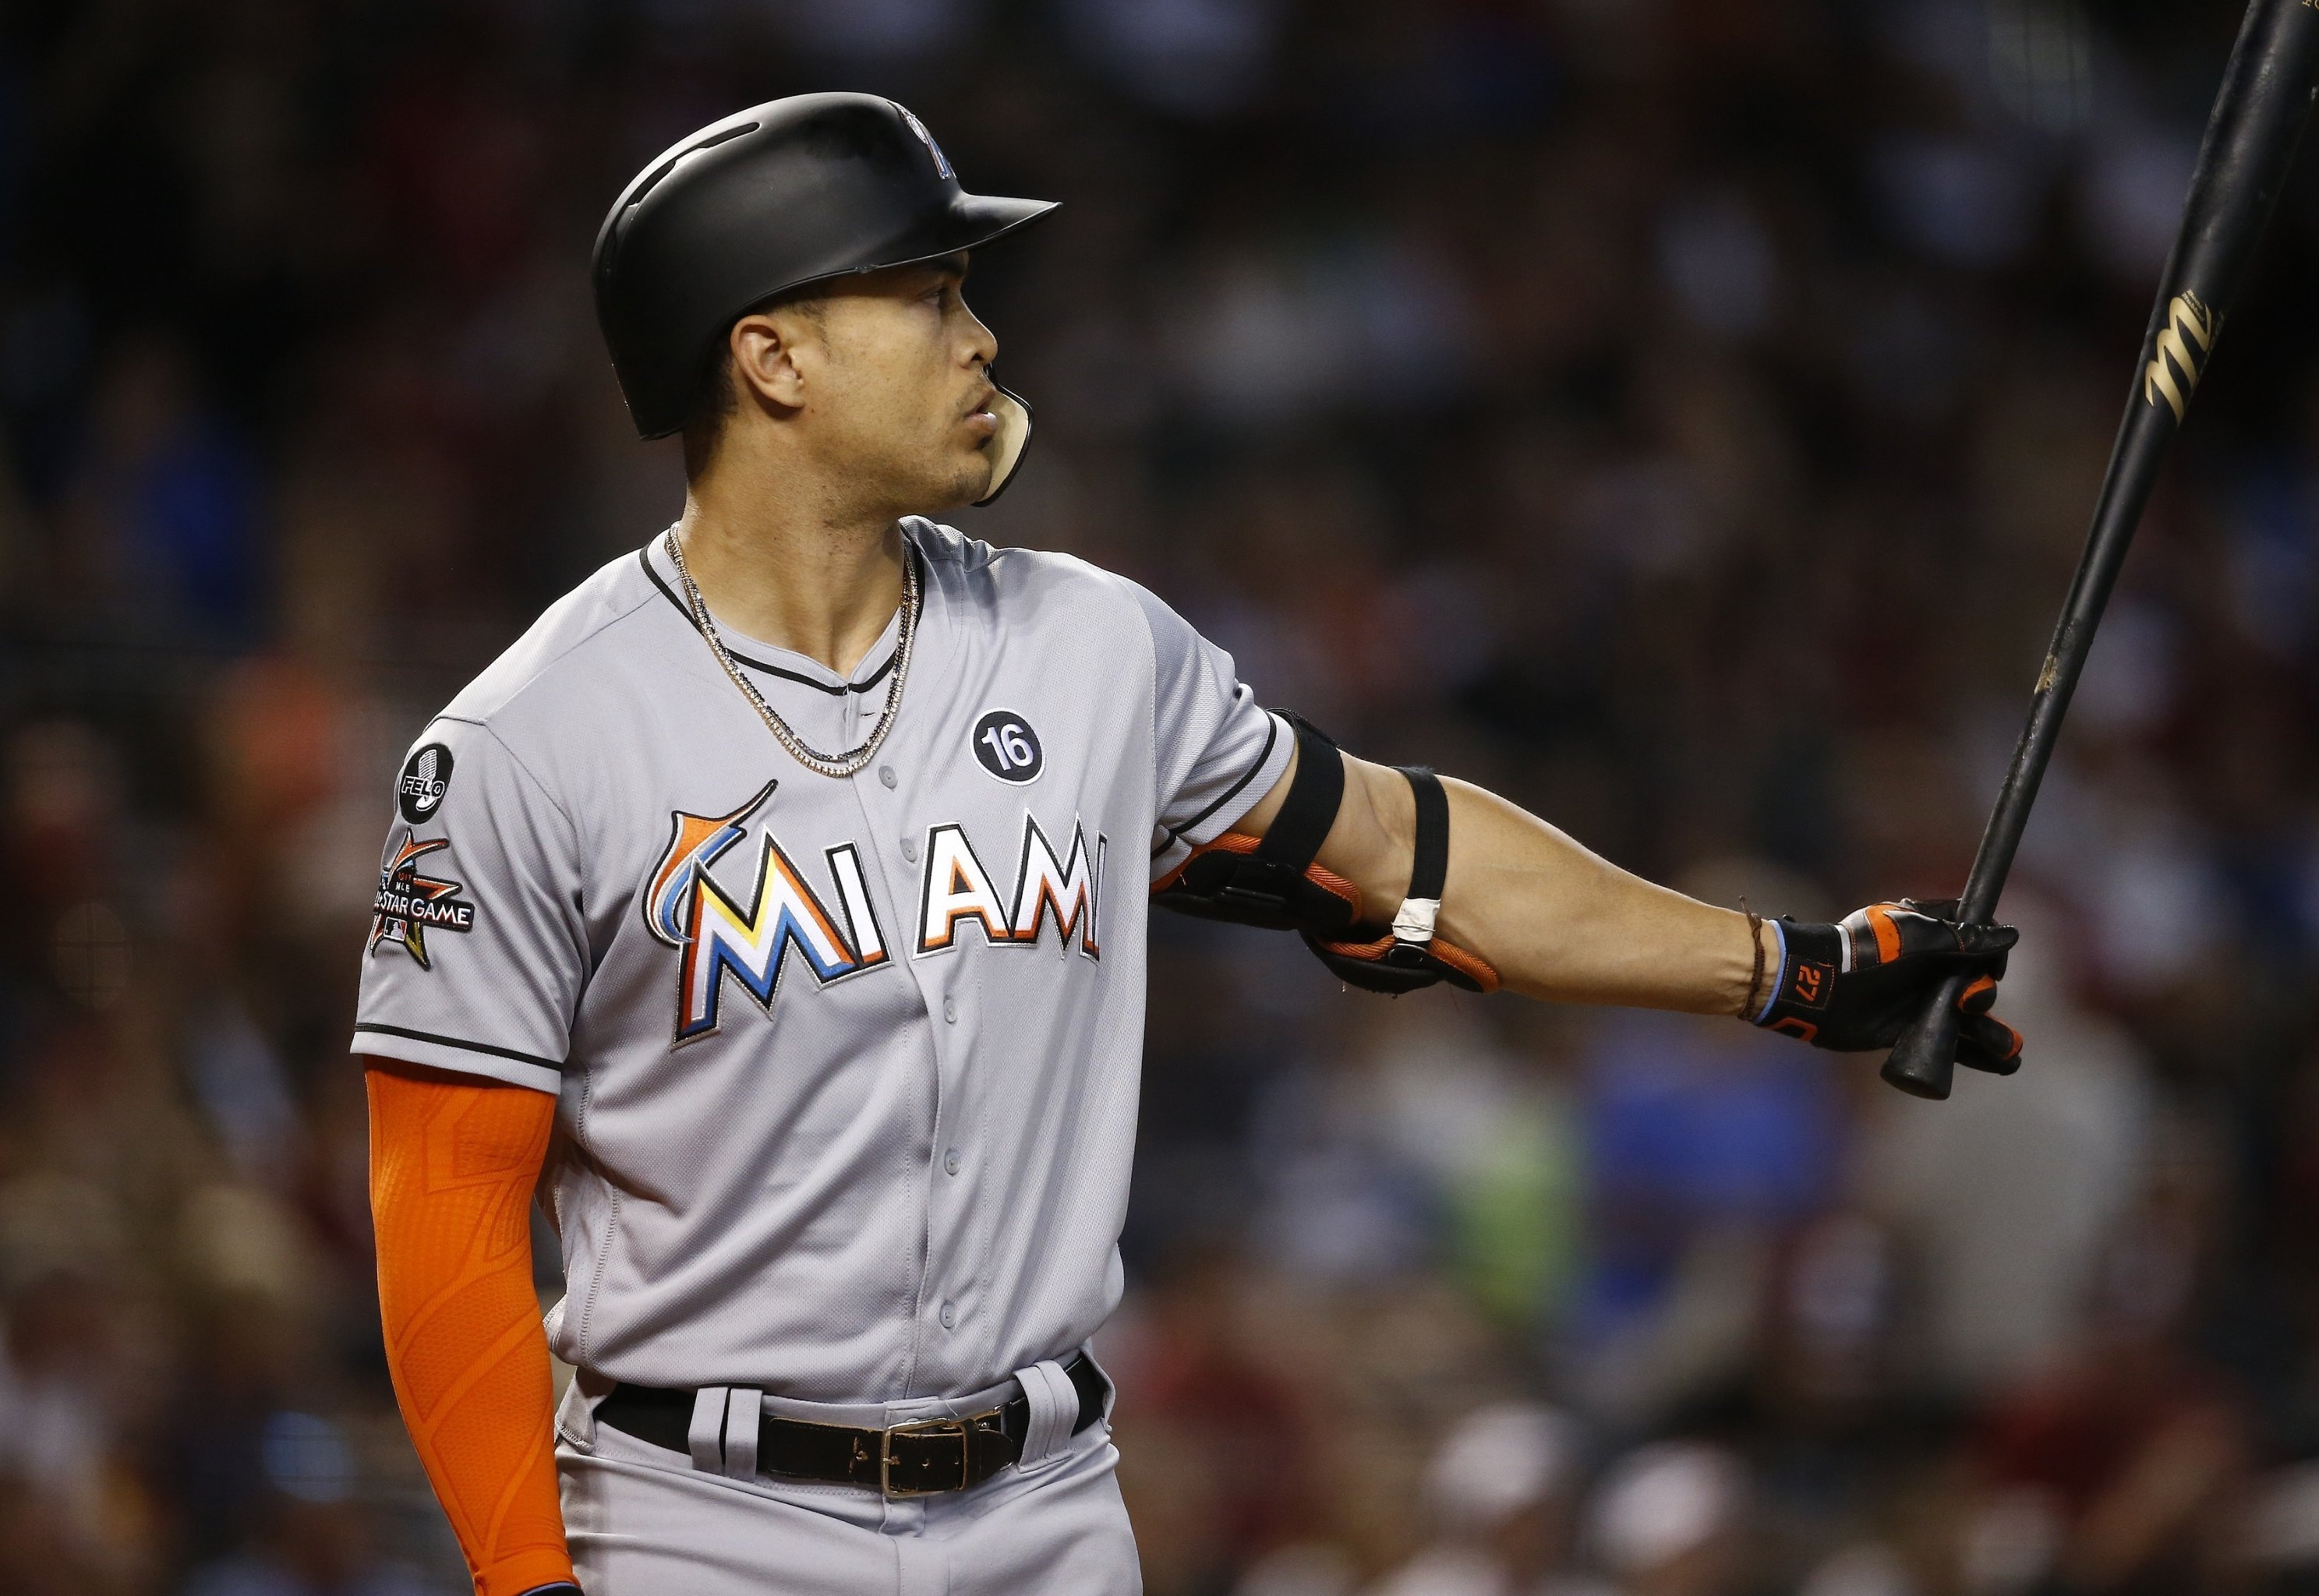 Ex-Giant Joe Panik signs with Mets, a homecoming for New York native